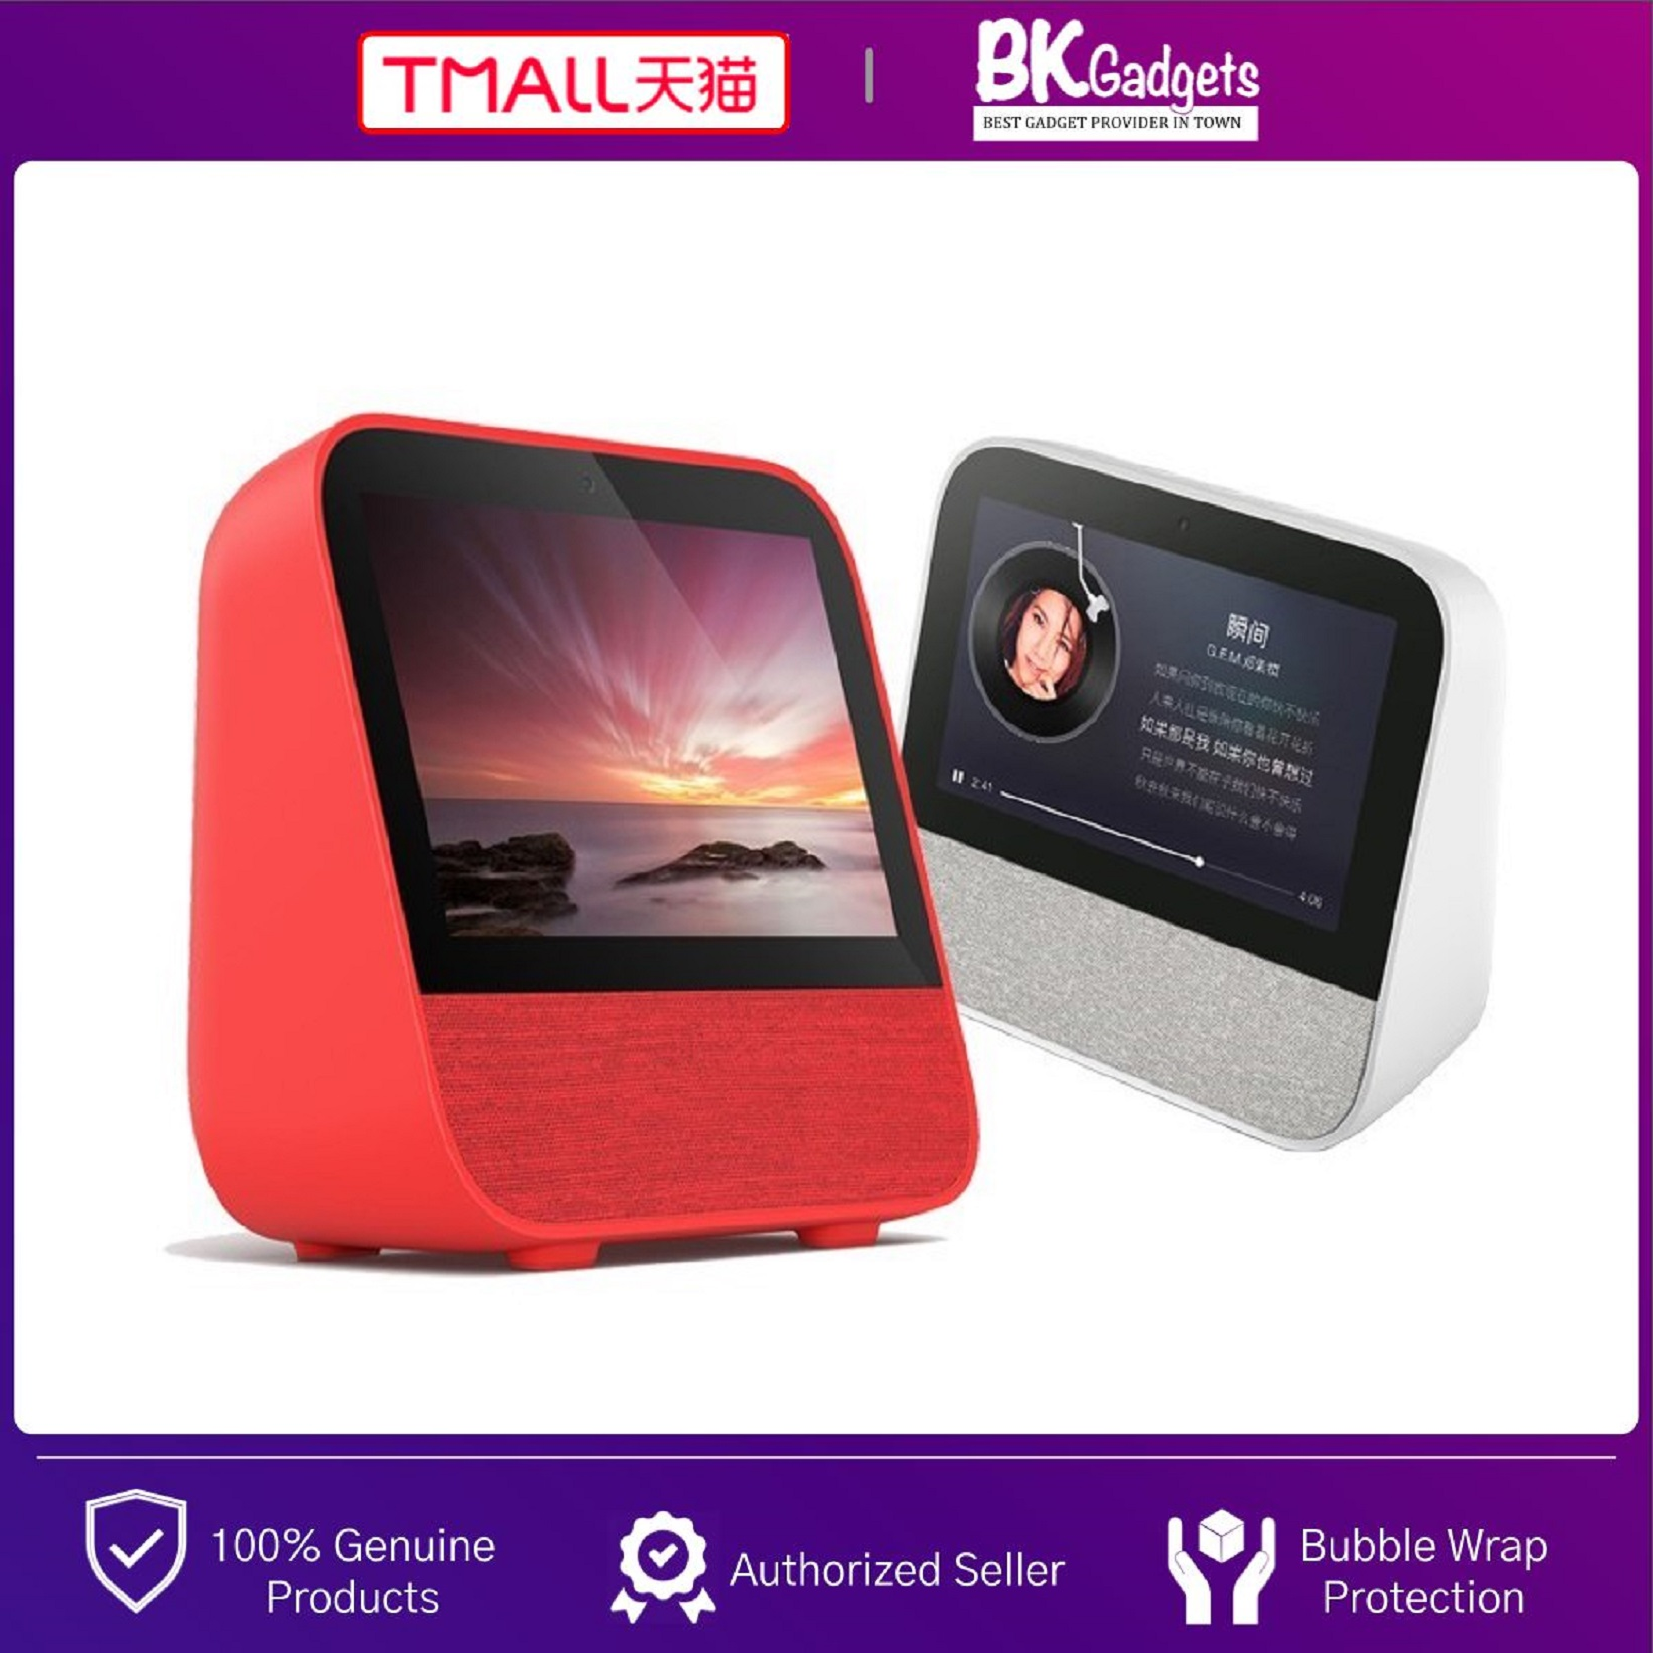 TMALL Genie CC Build in Tmall Genie Smart Assistant - Smart AI Speaker with 7 Inch LCD Display Touch Screen | Camera